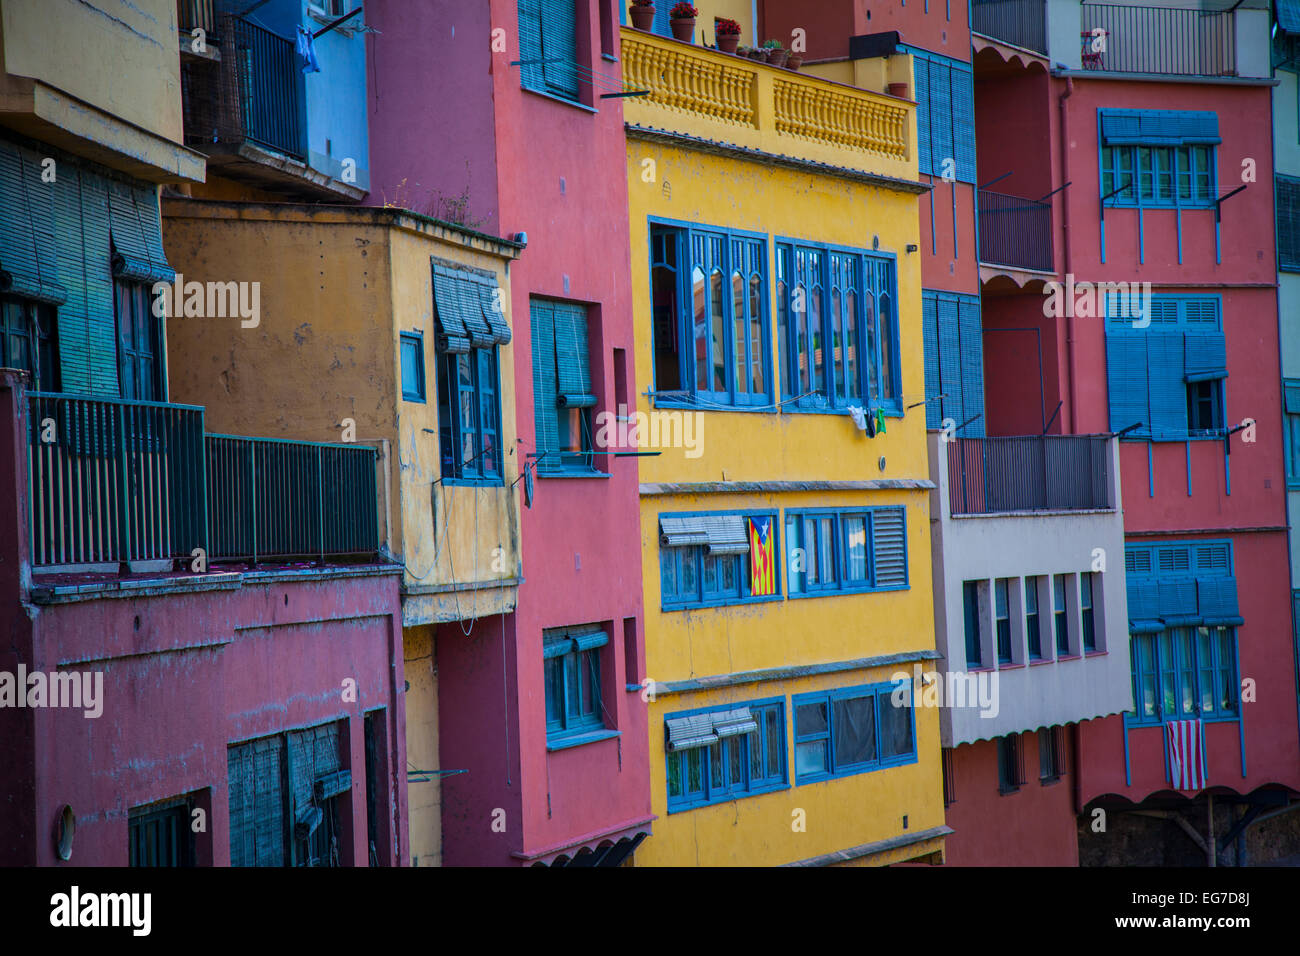 Colorful houses and apartments by the river Onyar in the historic city of Girona, Catalonia, Spain Stock Photo